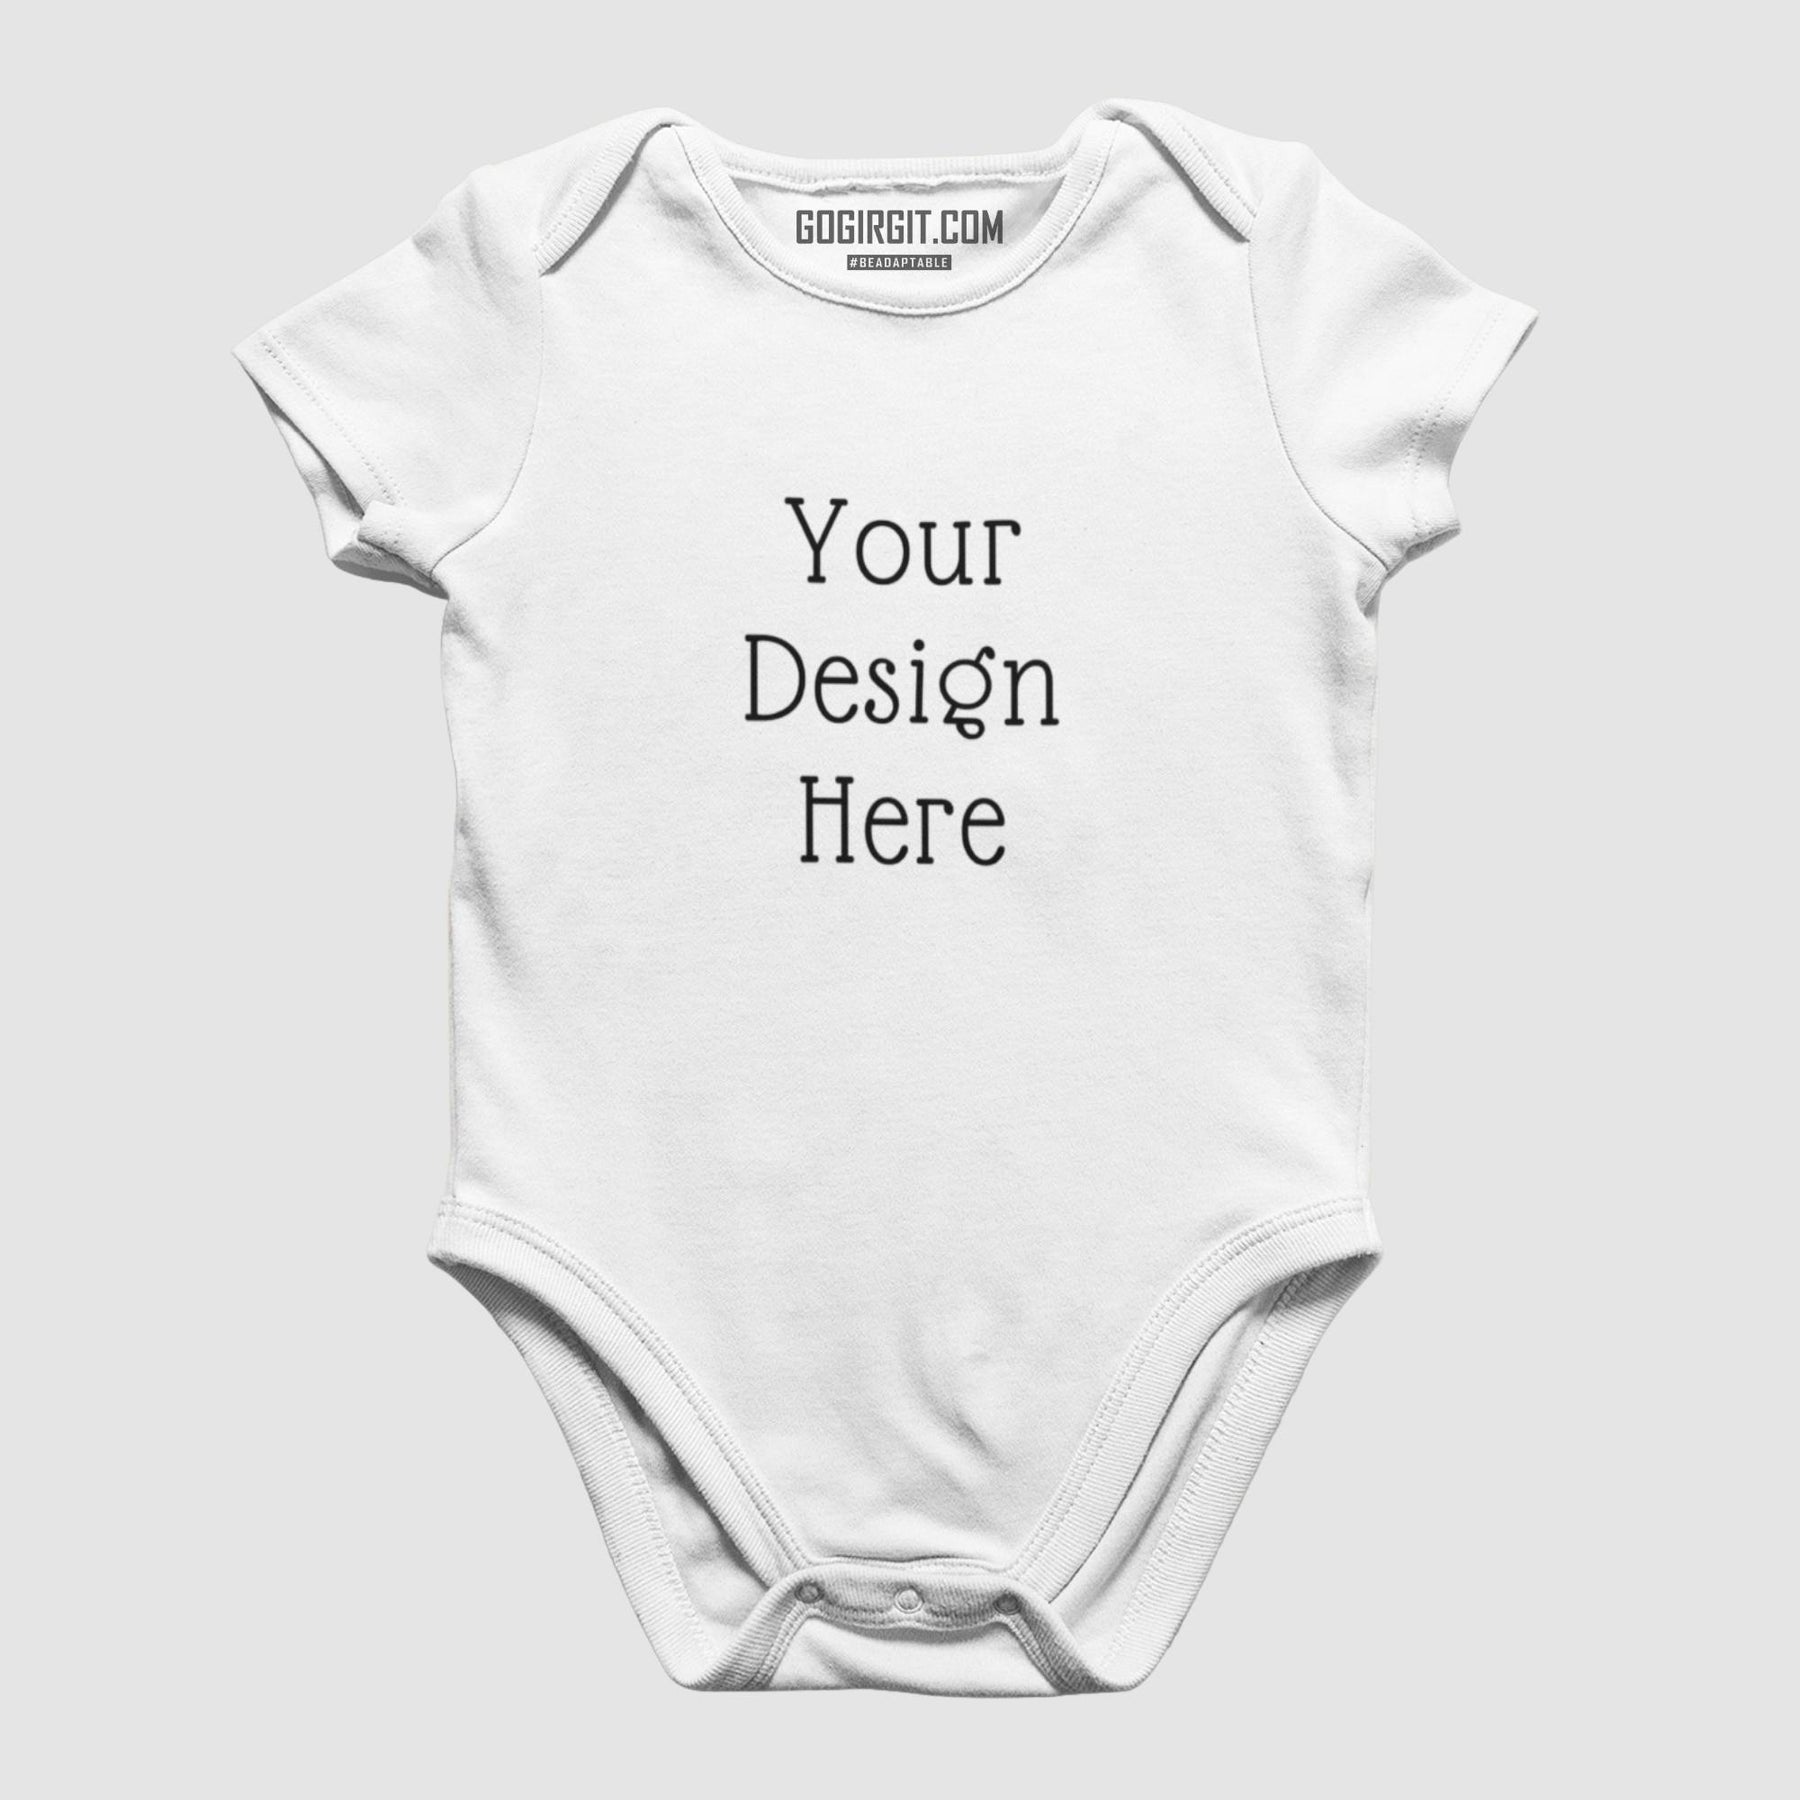 cotton-rompers-for-kids-also-called-onesie-personalised-and-customized-color-white-gogirgit